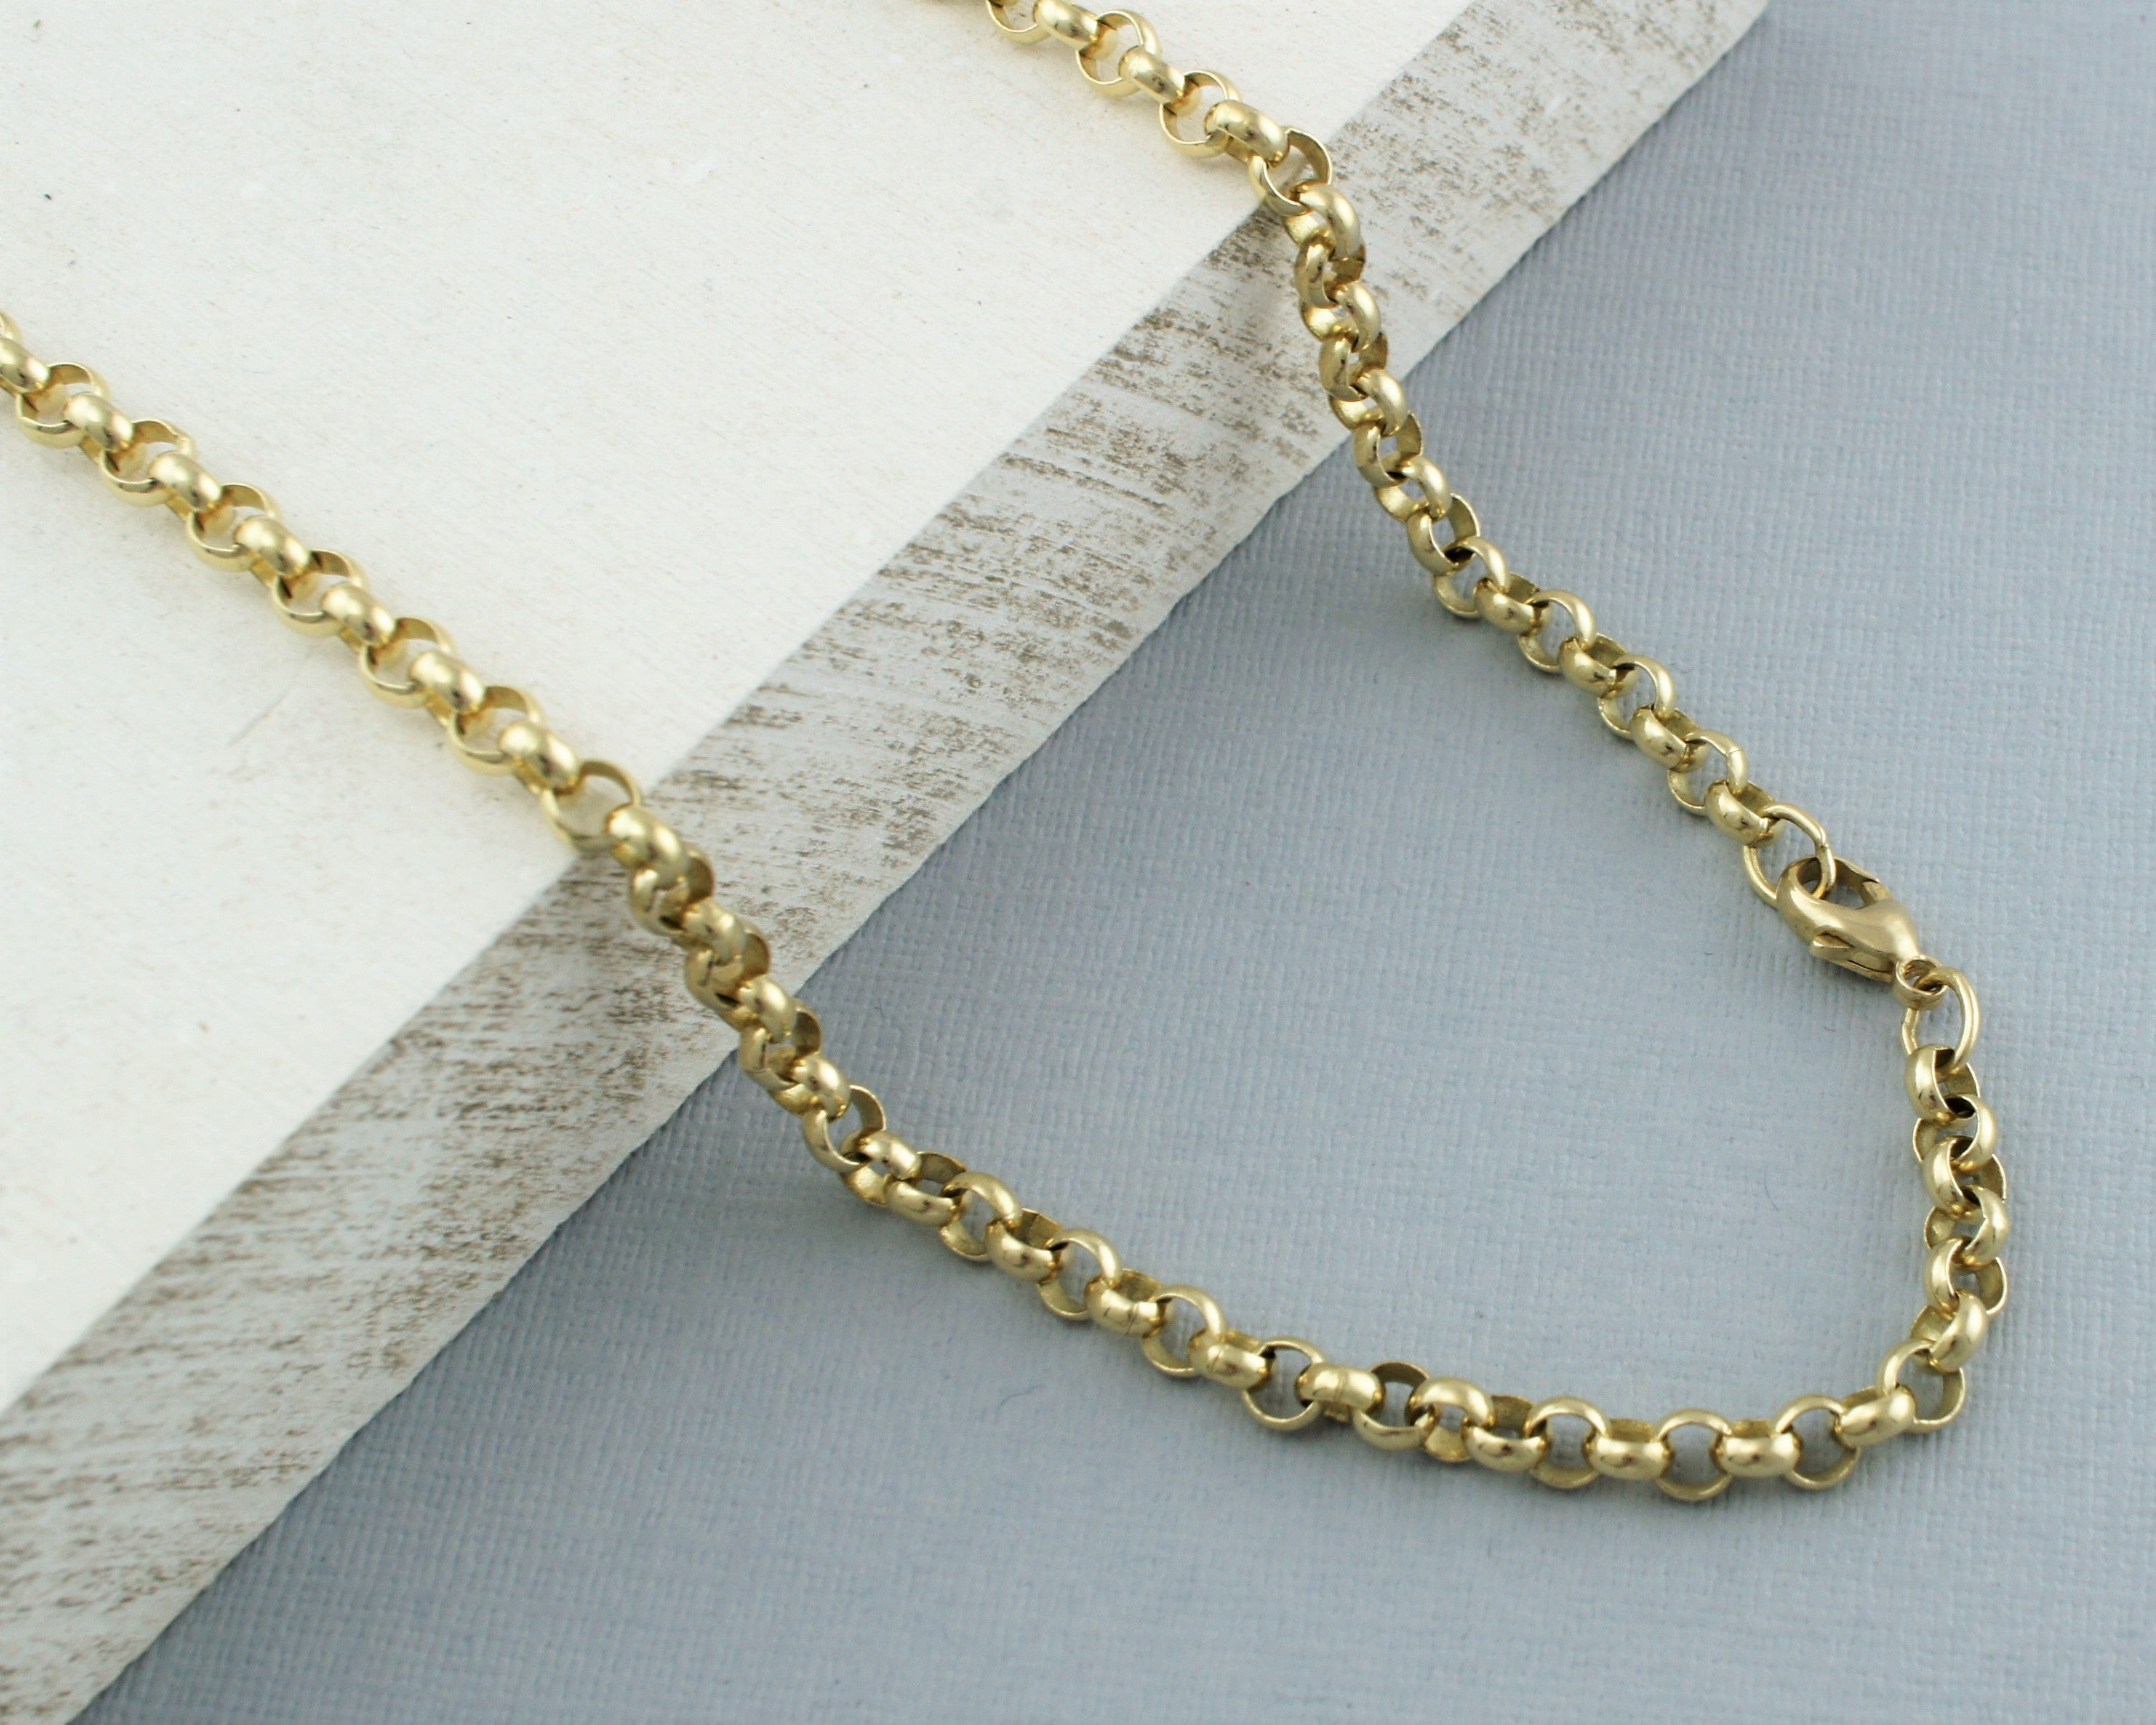 9ct Solid Gold Chain For Men 375 Solid Gold Belcher Chain Necklace - 4 ...